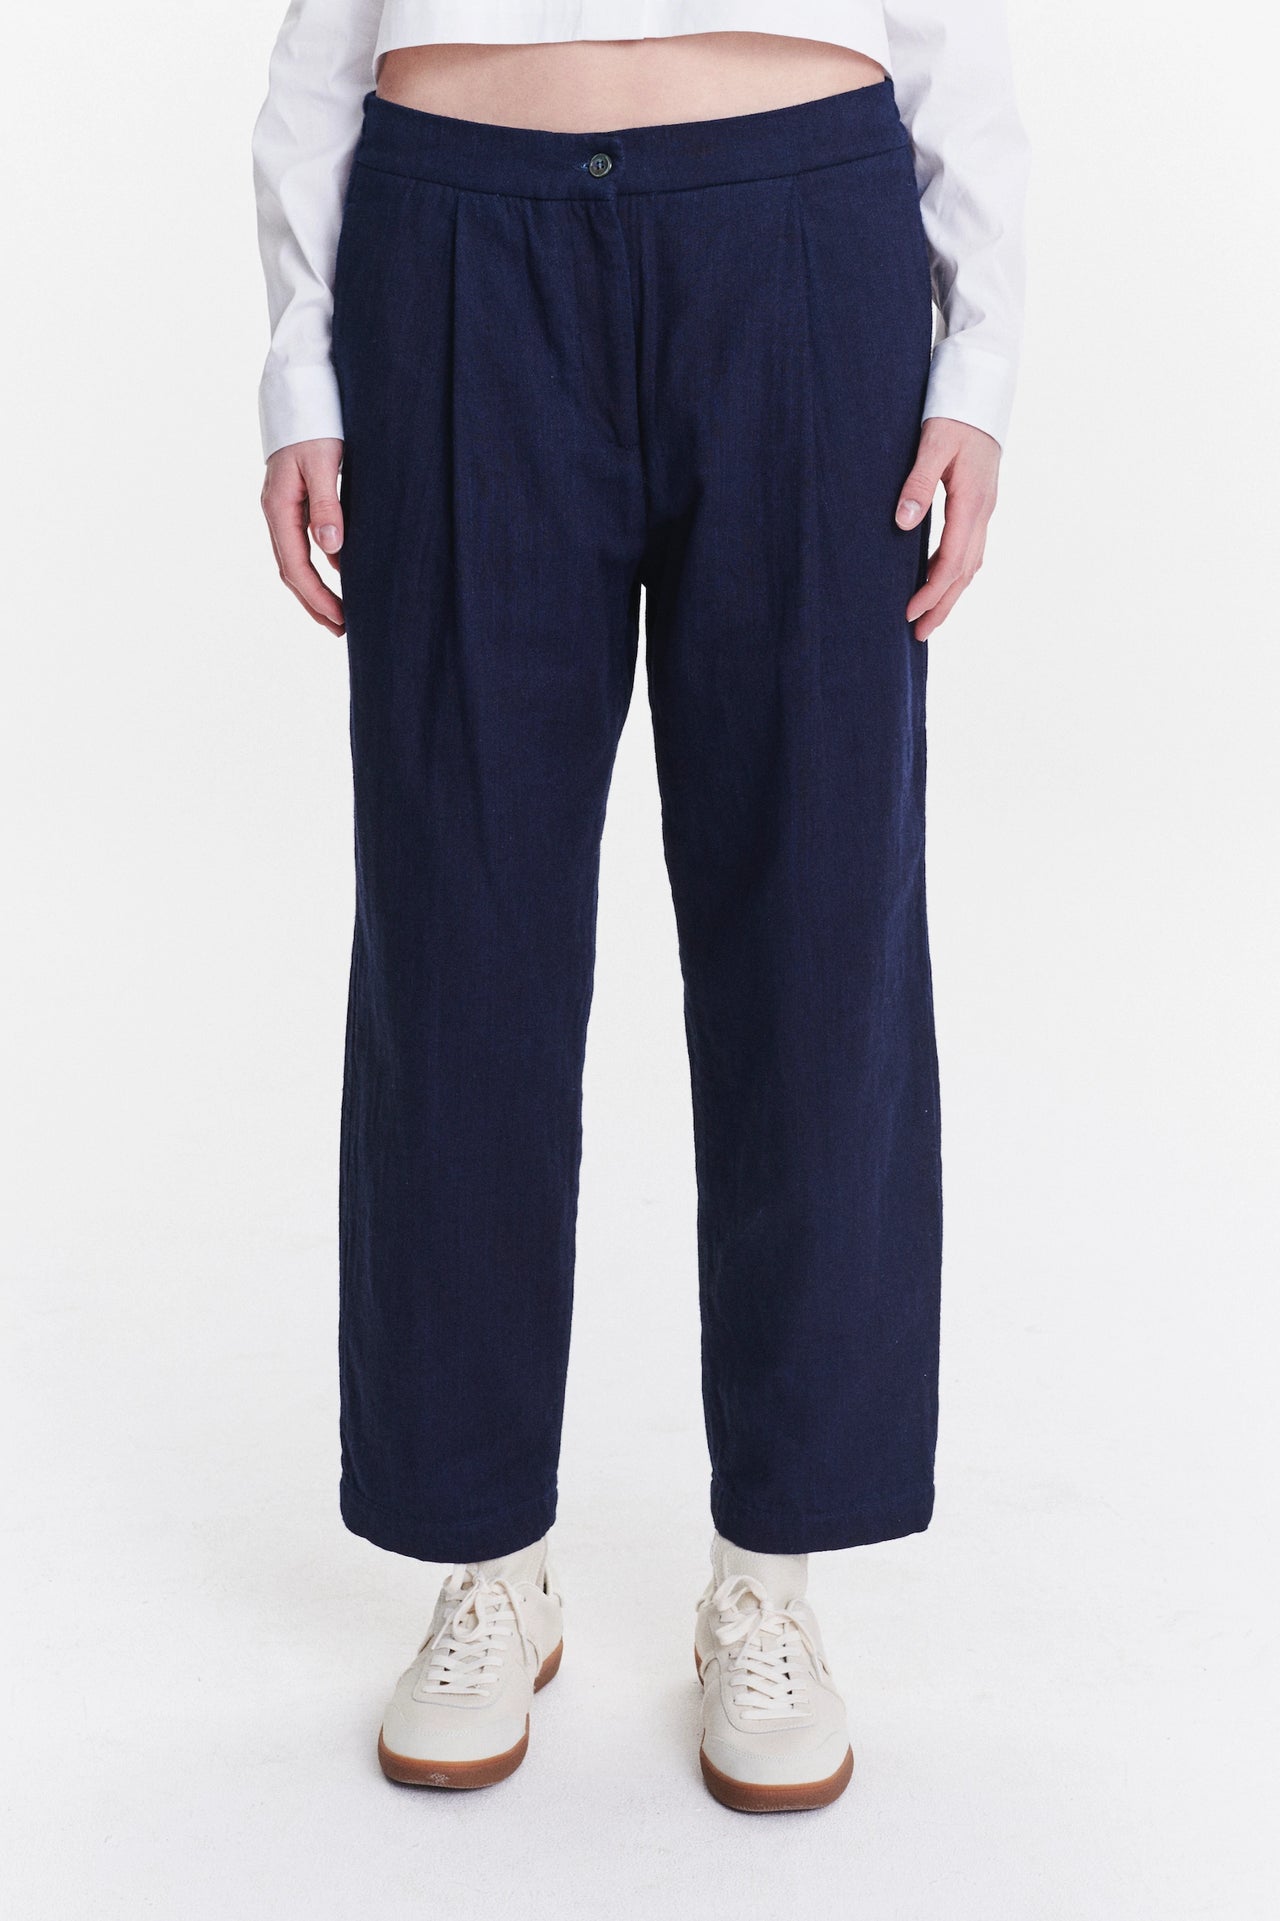 Trousers in a Profound Blue Double Sided  Japanese Kuroki Structural Cotton Denim